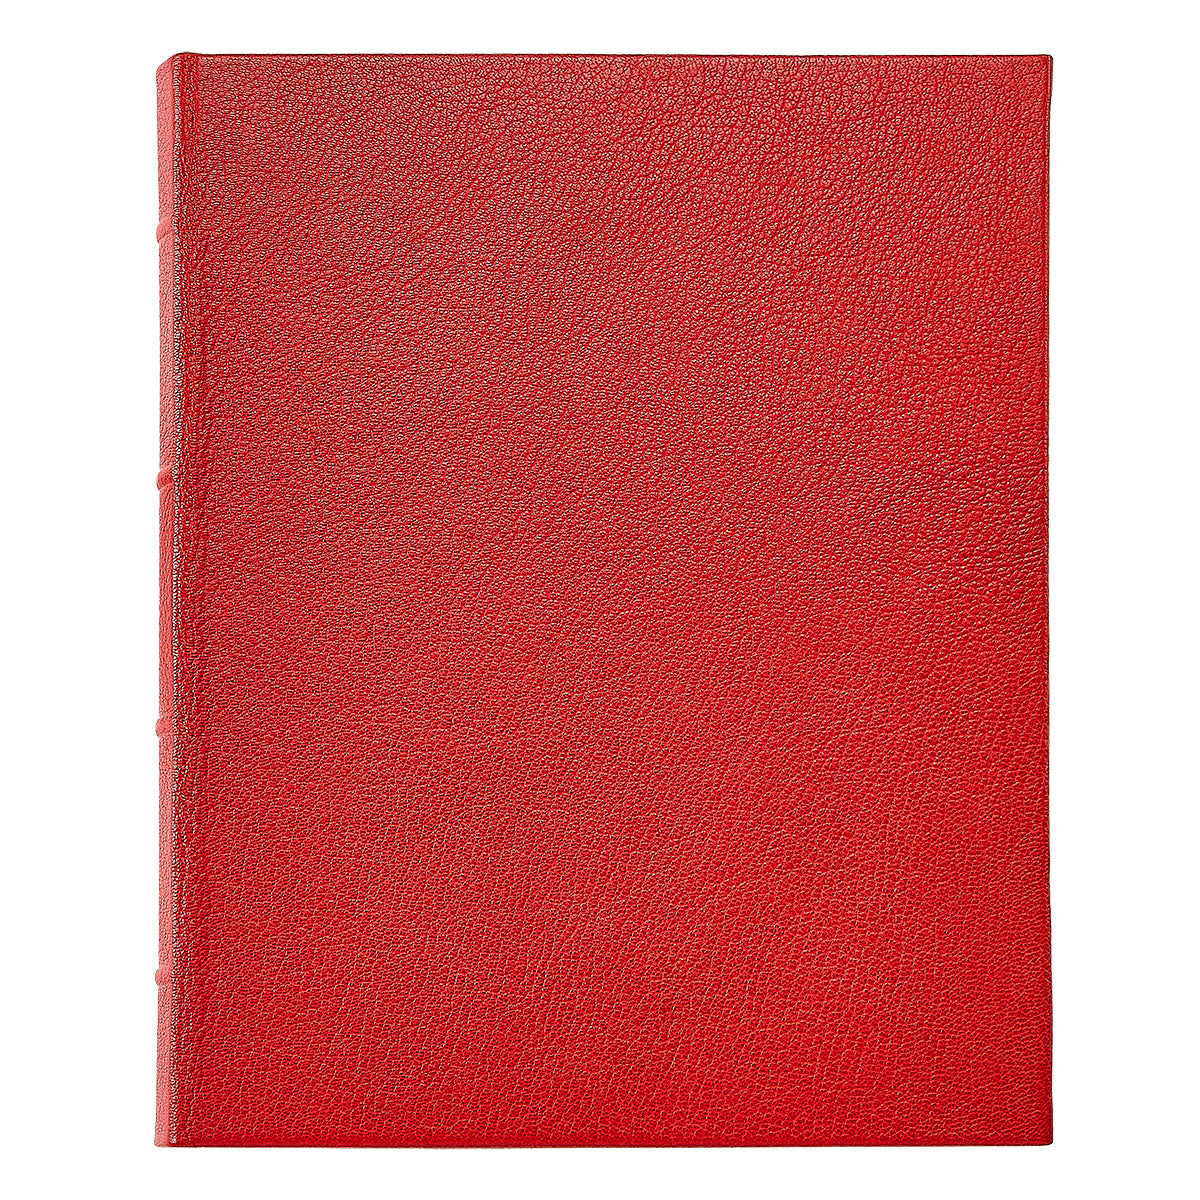 Graphic Image 11 Hardcover Unlined Manuscript Red Traditional Leather